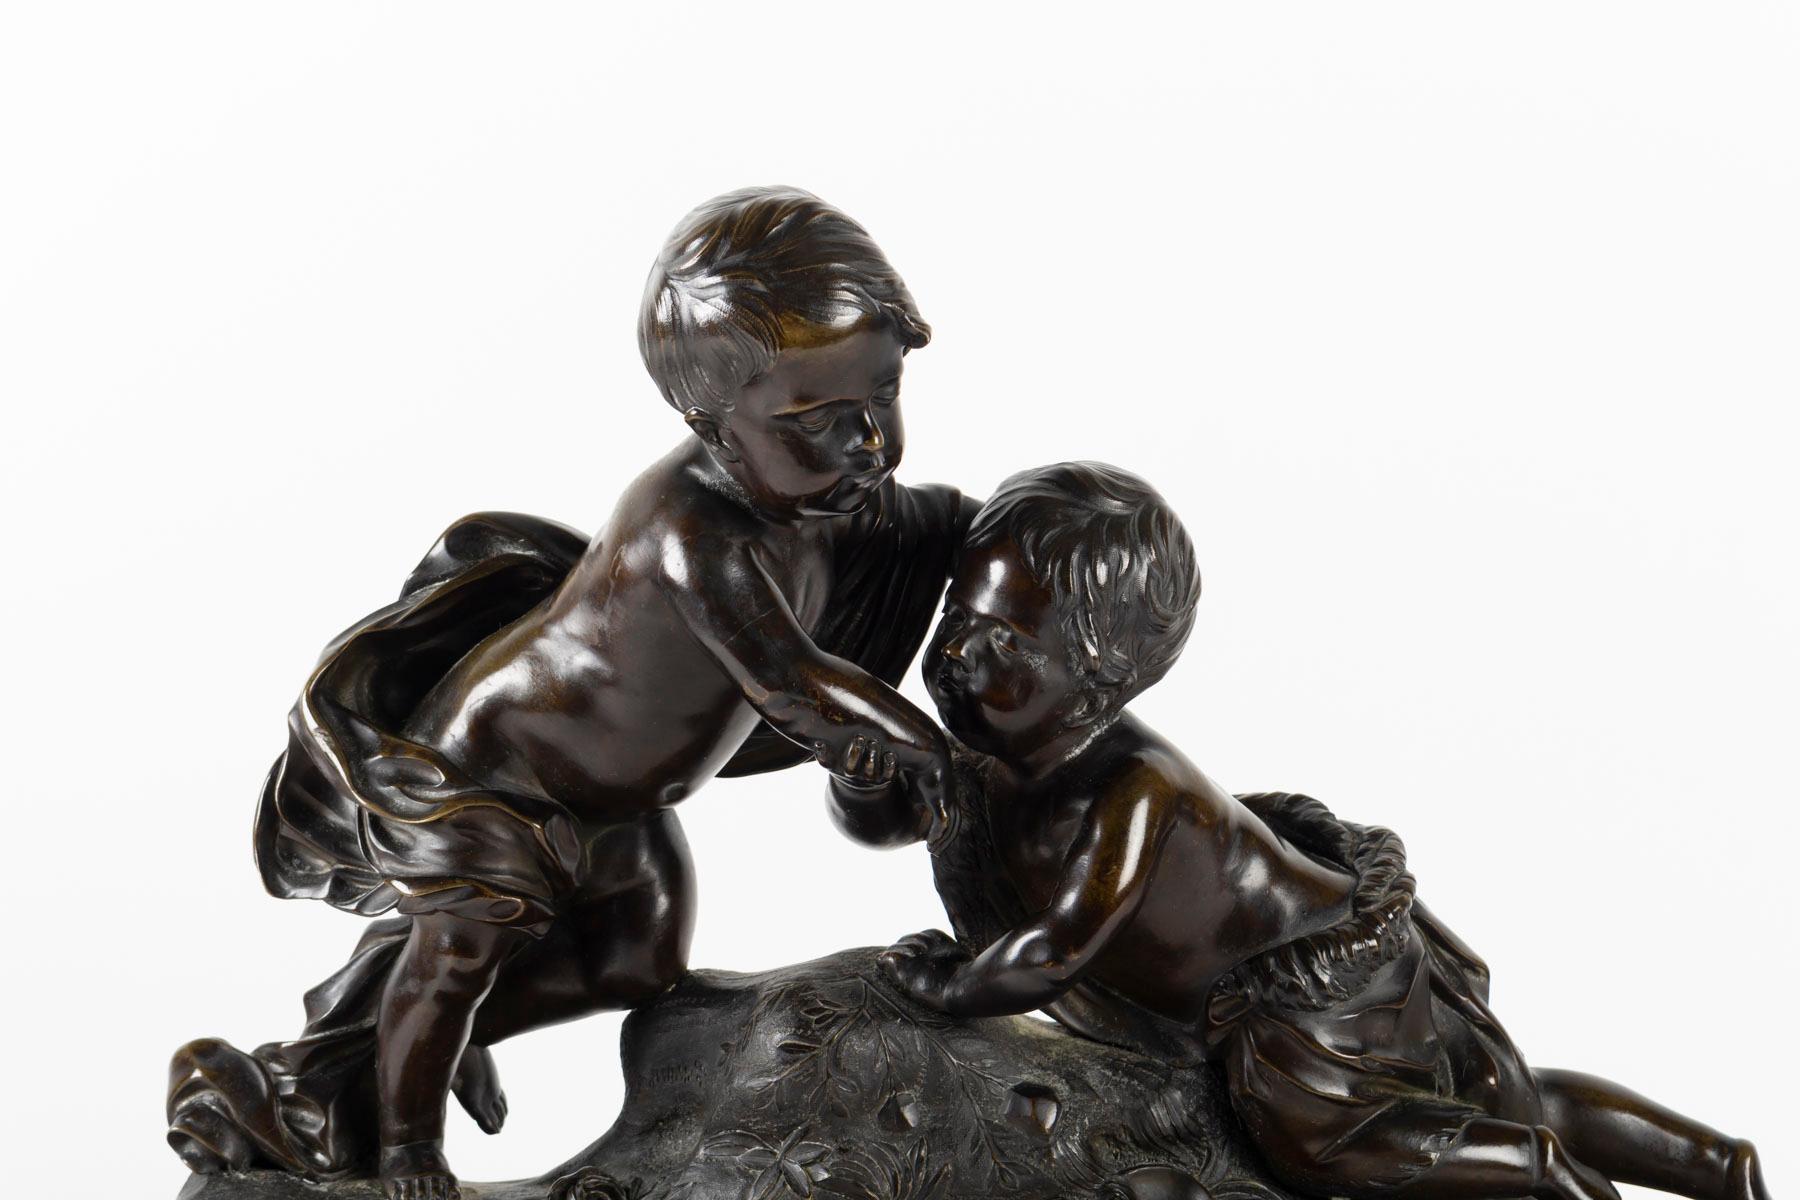 Bronze sculpture from the 18th century, from the Louis XVI period on its original grey and golden bronze marble base
Measures: H 40cm, W 44cm, P 16cm.